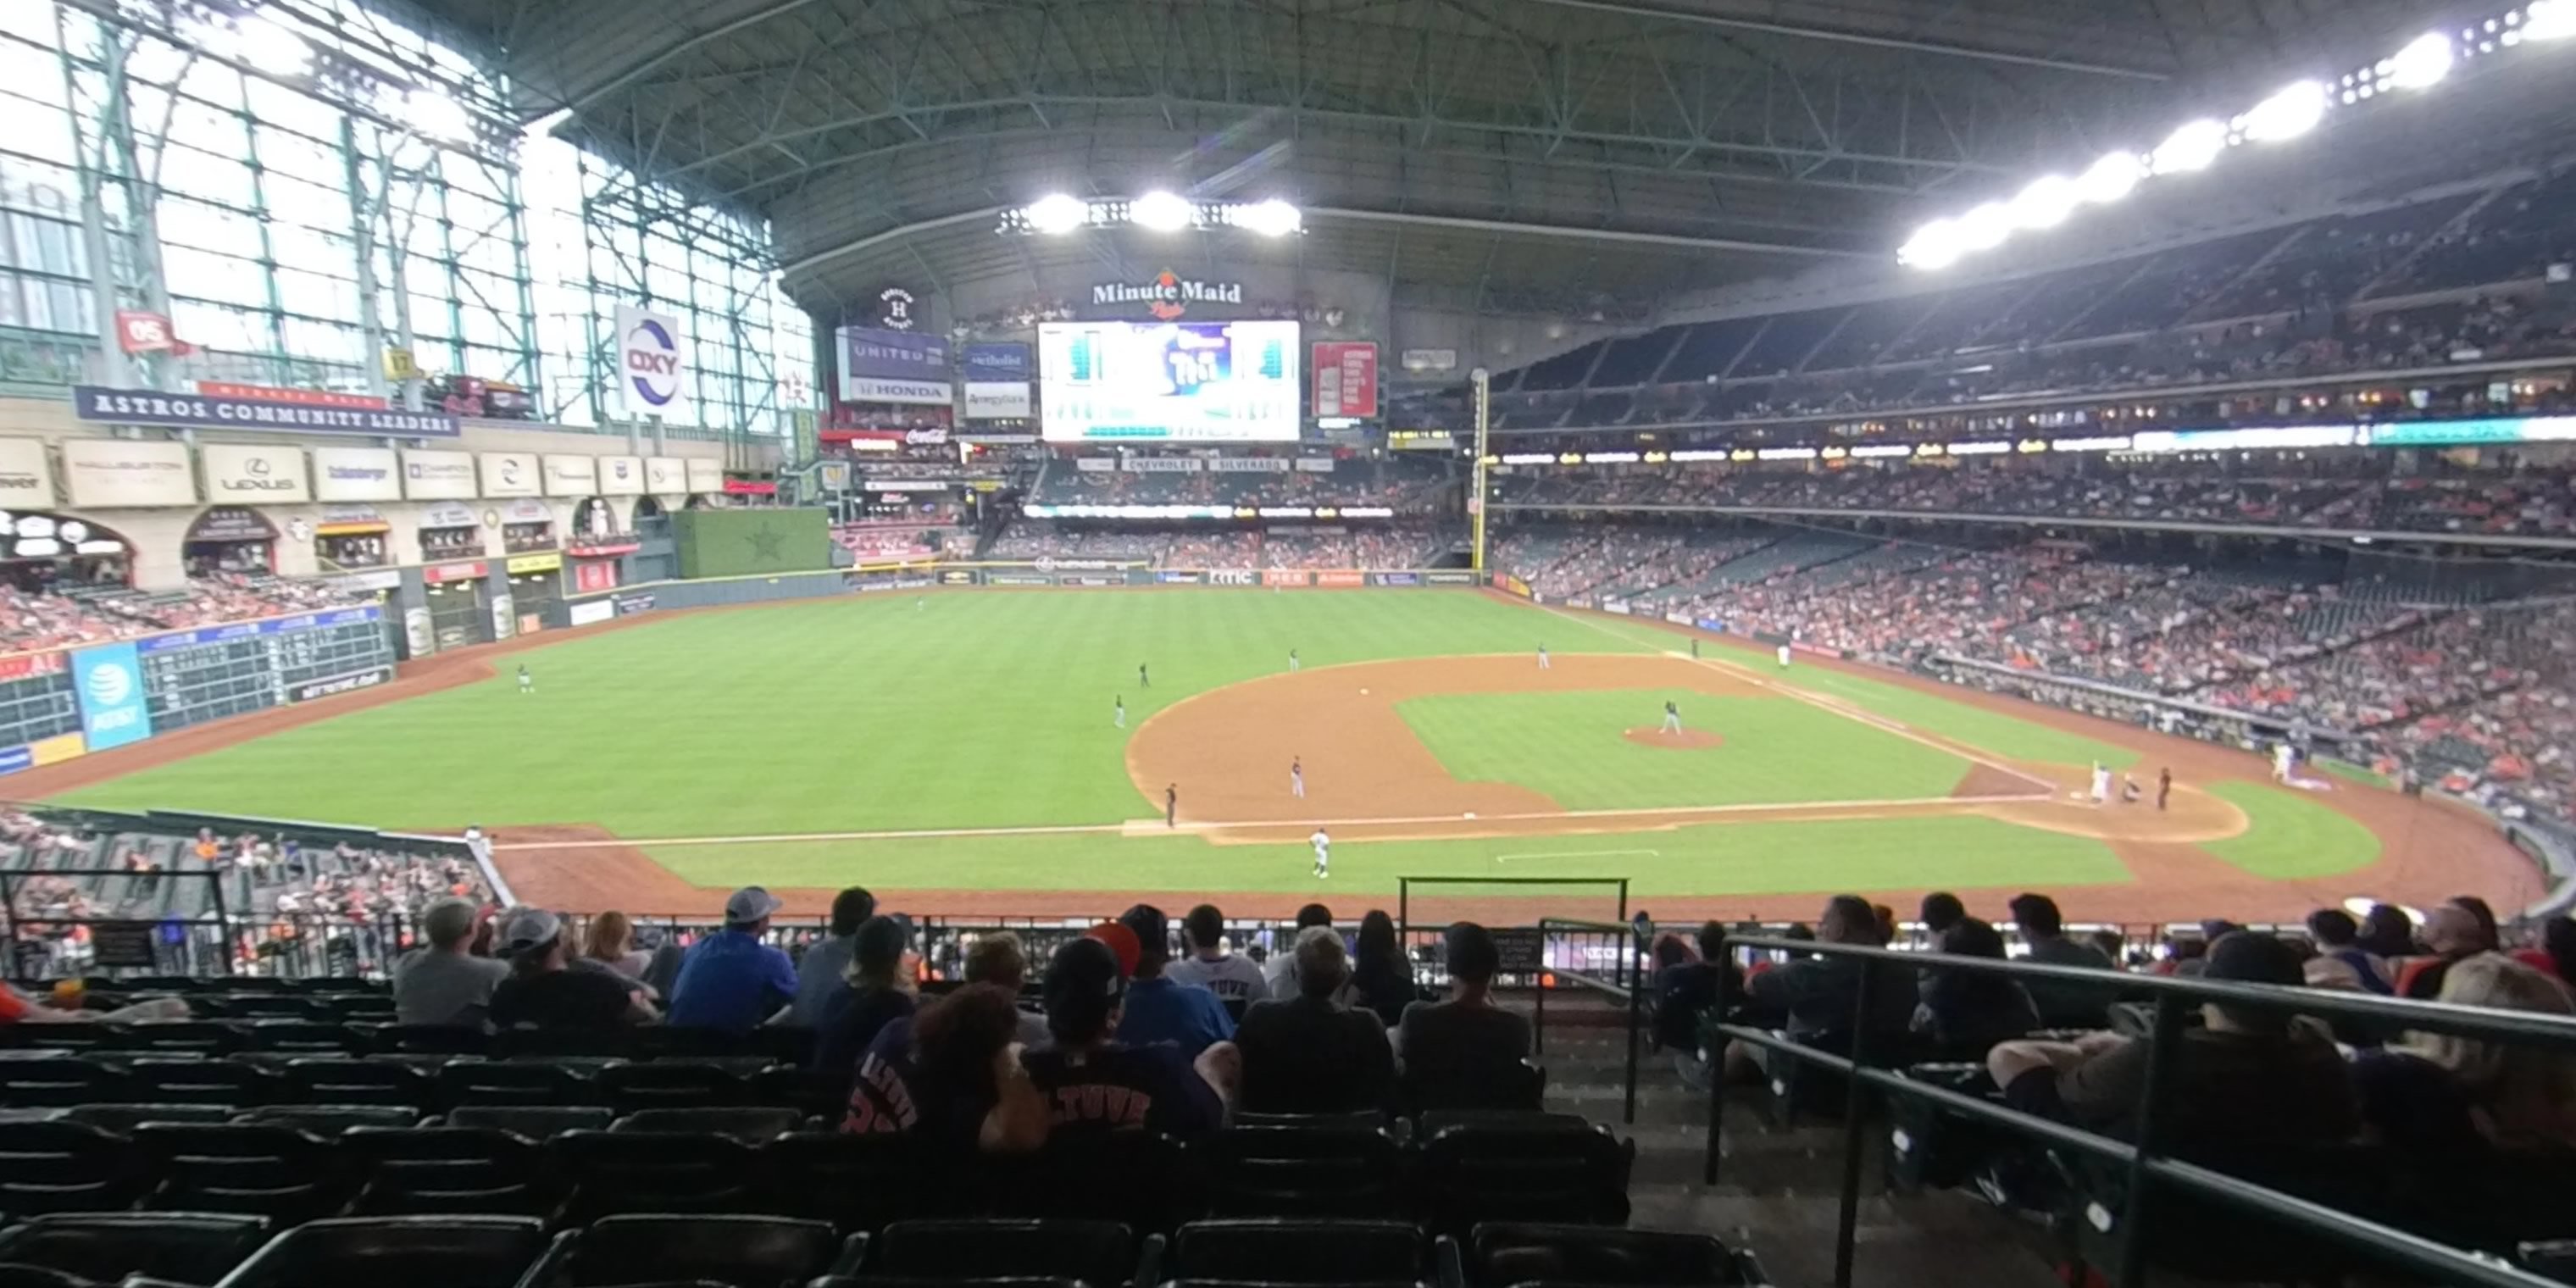 section 211 panoramic seat view  for baseball - minute maid park